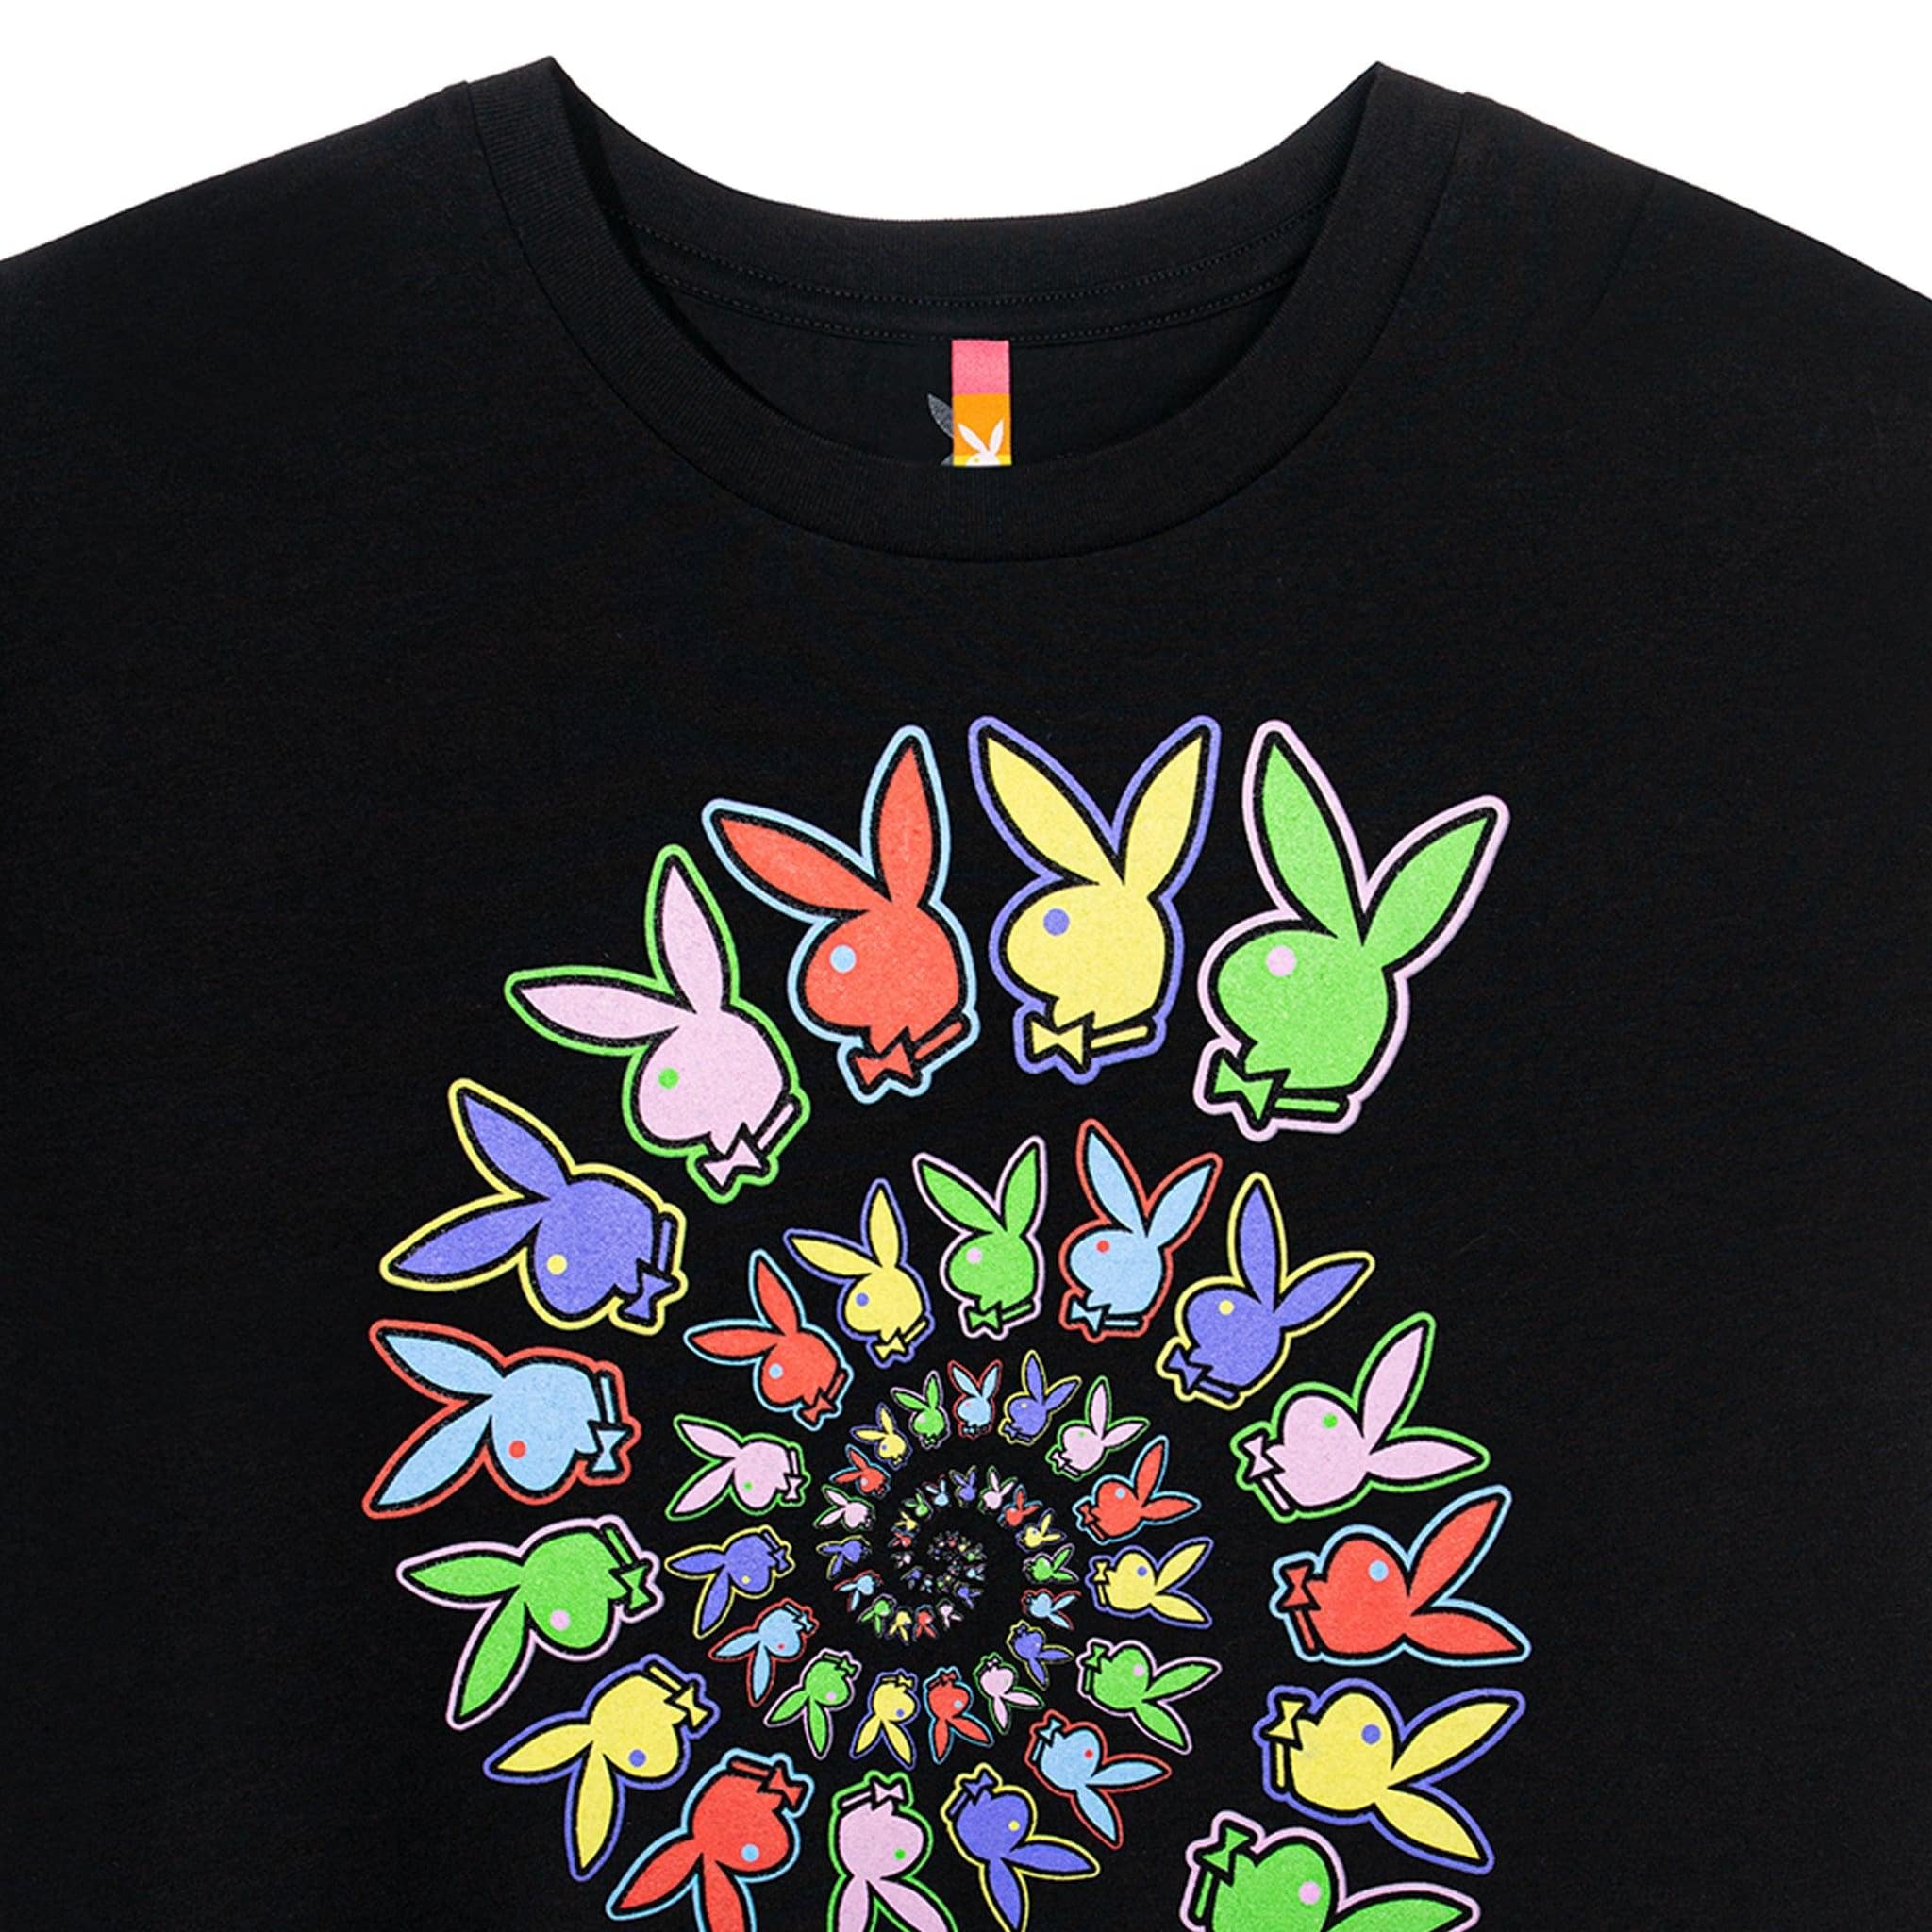 Playboy x Color Bars Spiral Women's Cropped T-Shirt